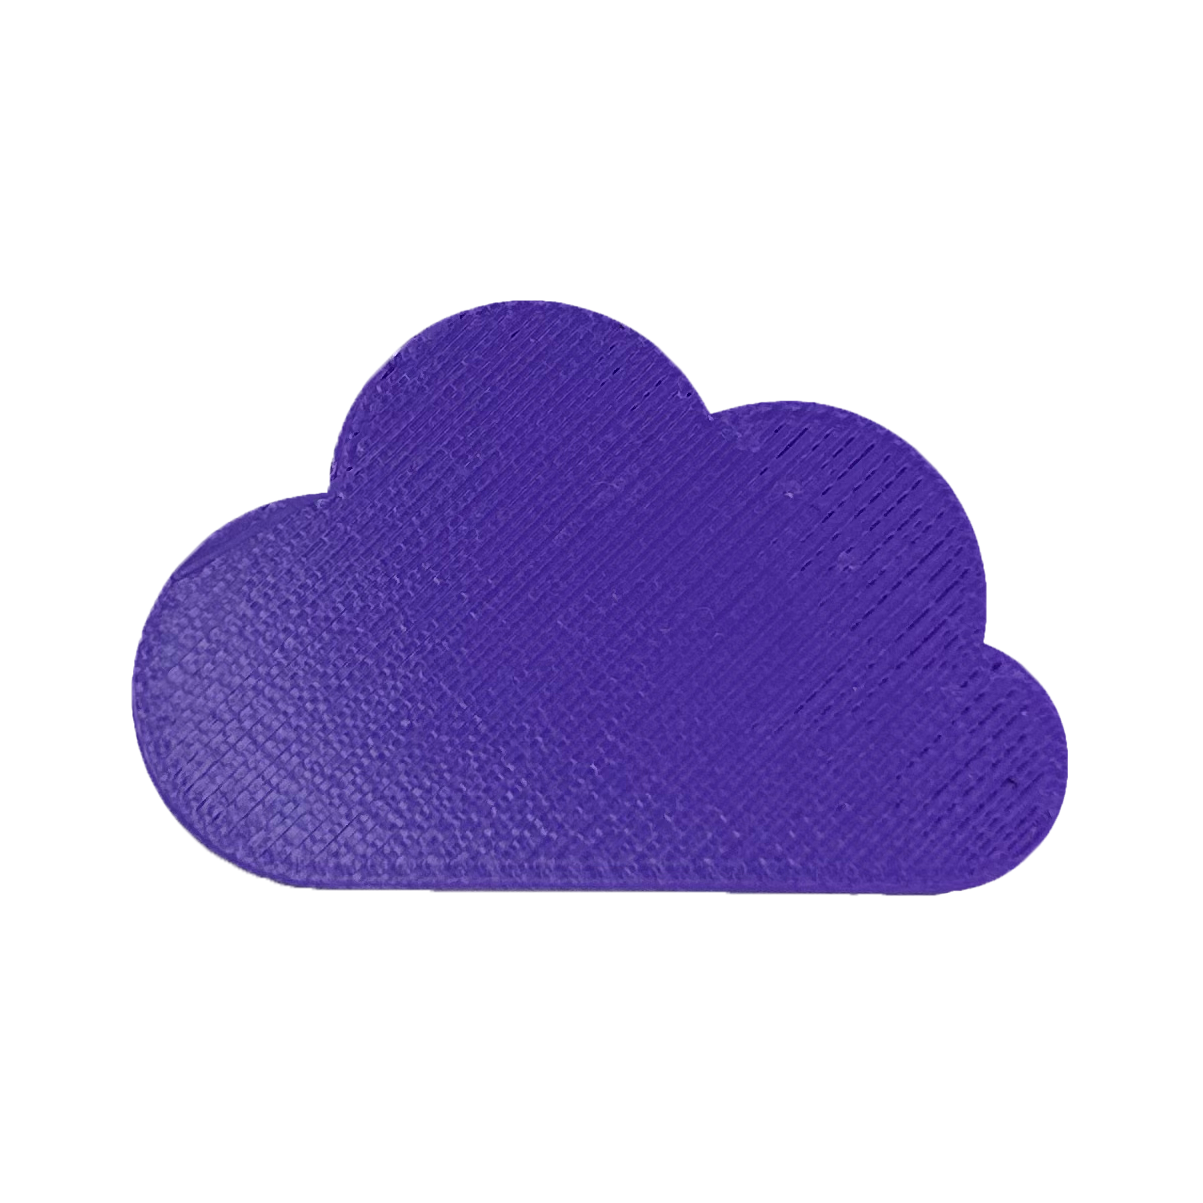 This is a sample of our purple eco friendly 3D printer filament. Rich and royal, our deep purple color pops when matched with complementary colors, but doesn't actually need anything more to stand out.